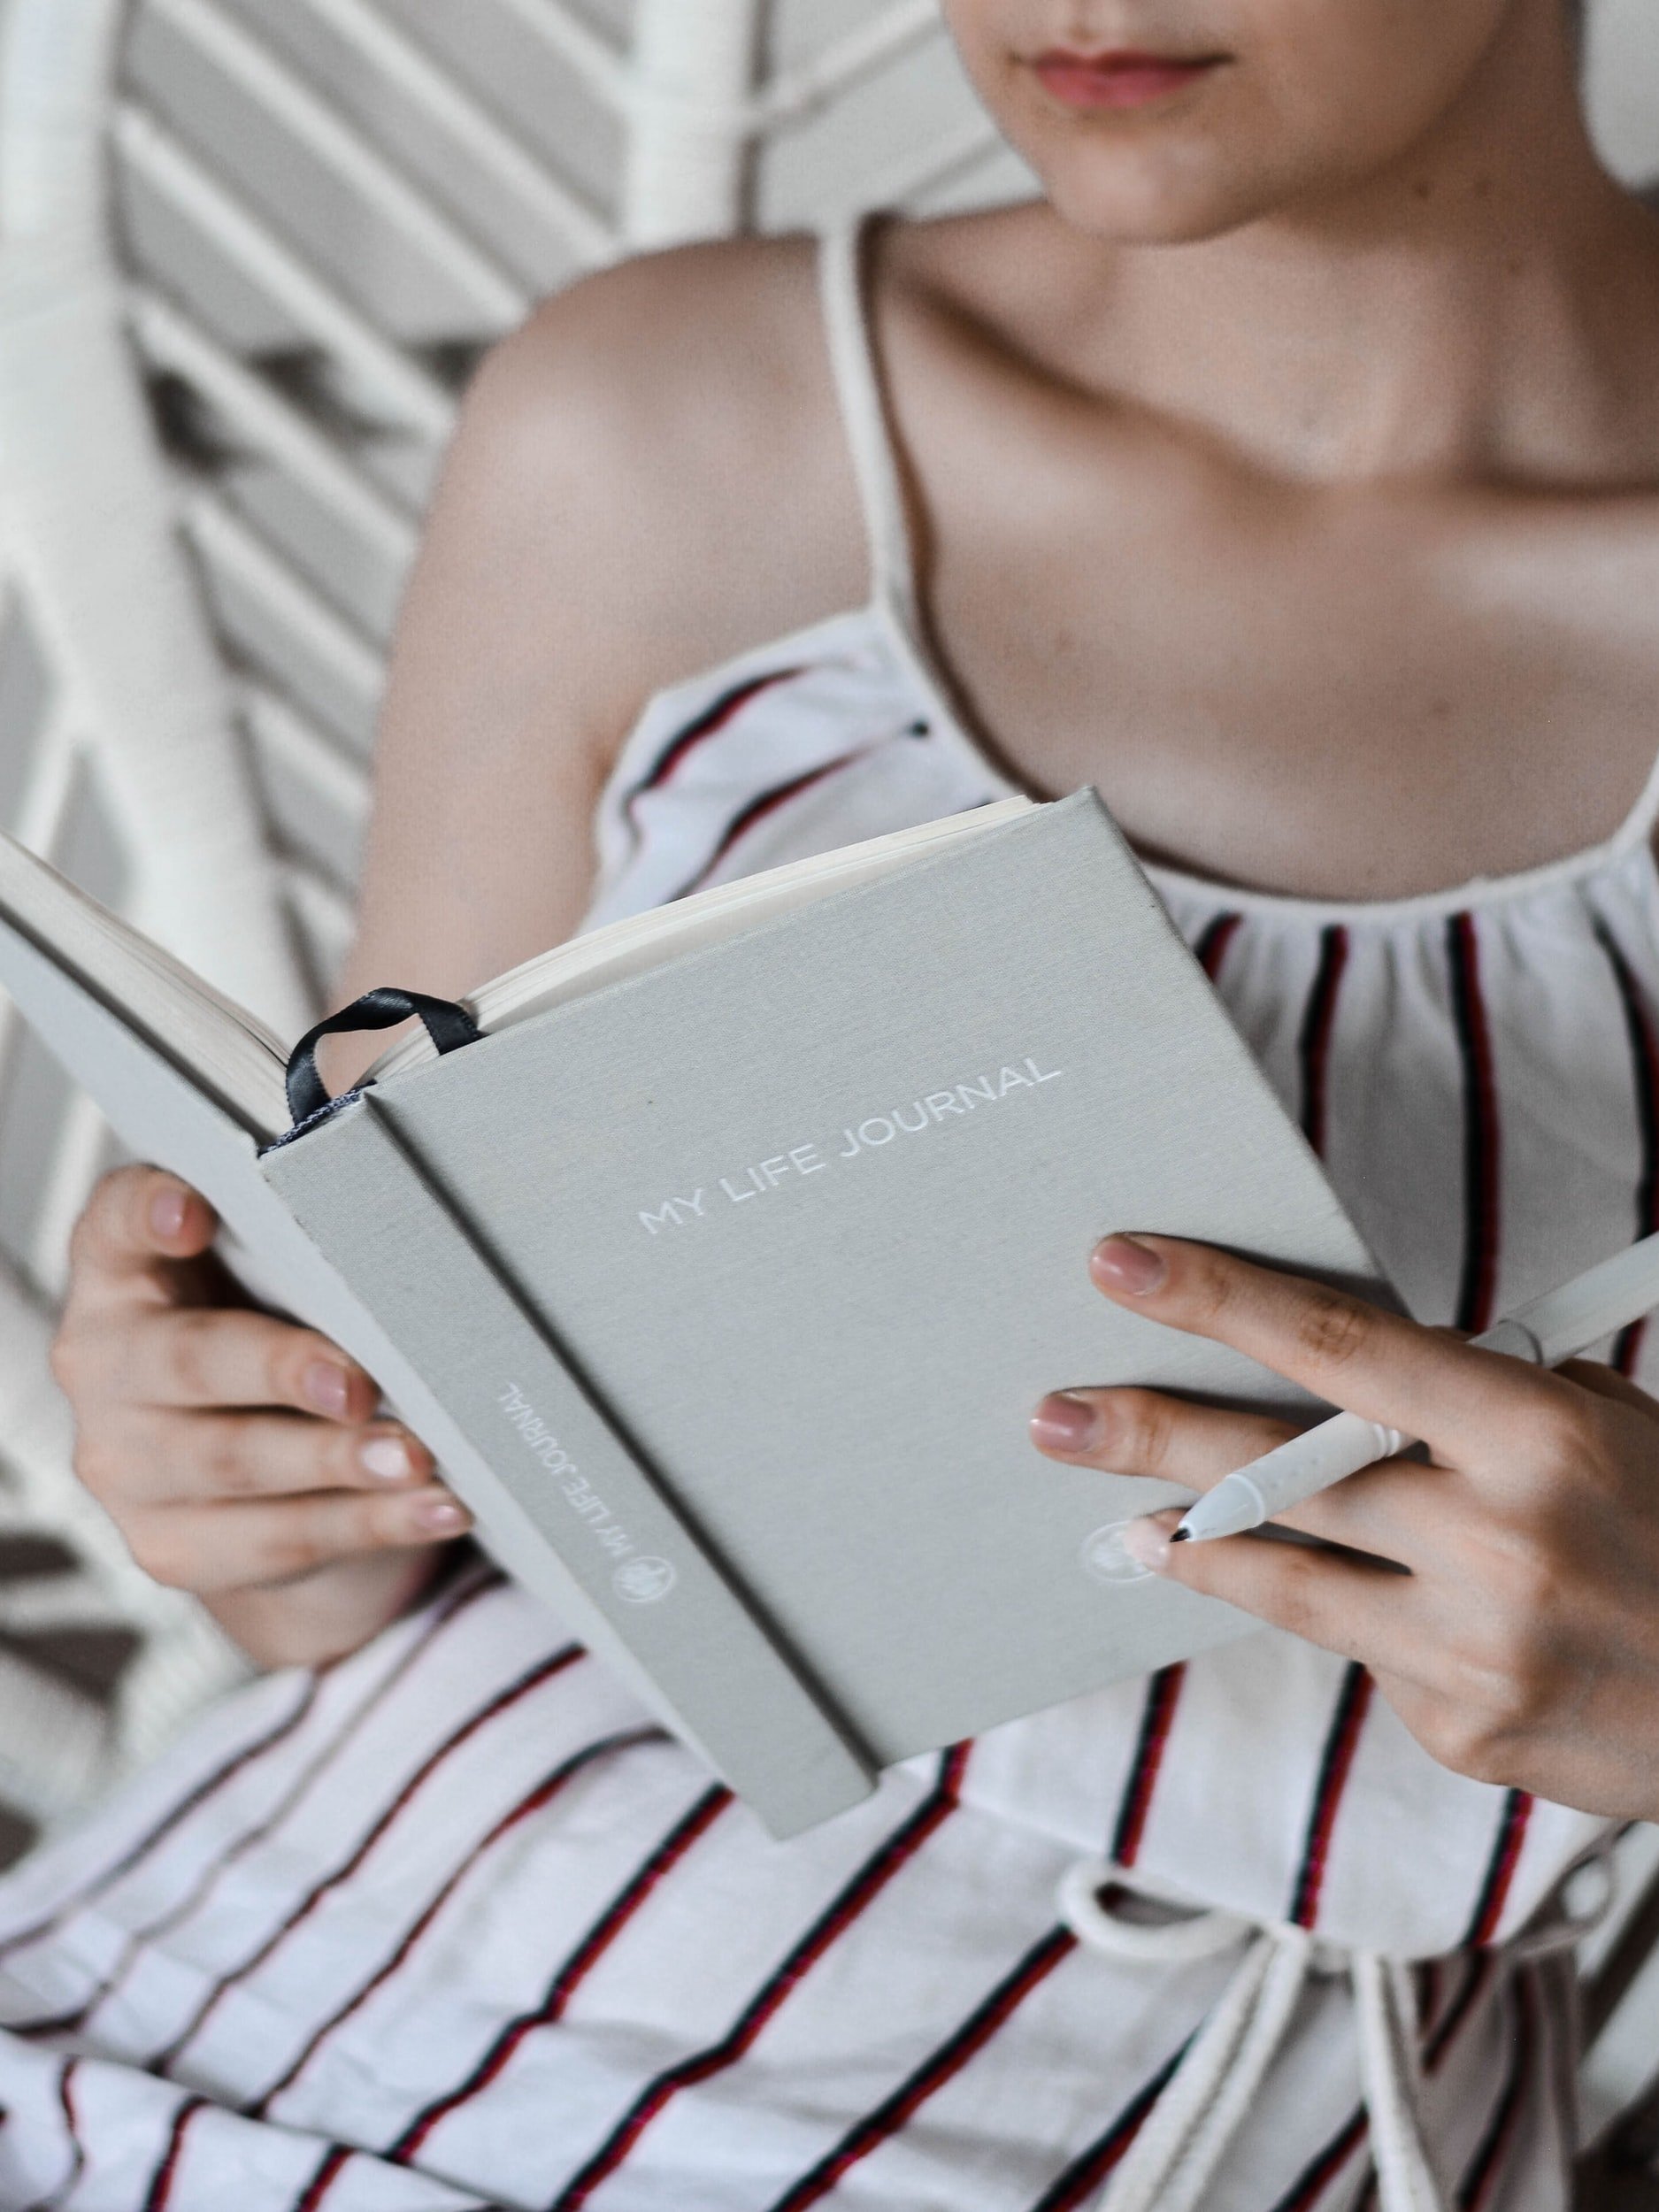 8 Simple Ways To Manifest Your Dreams With Journaling &amp; Visualization